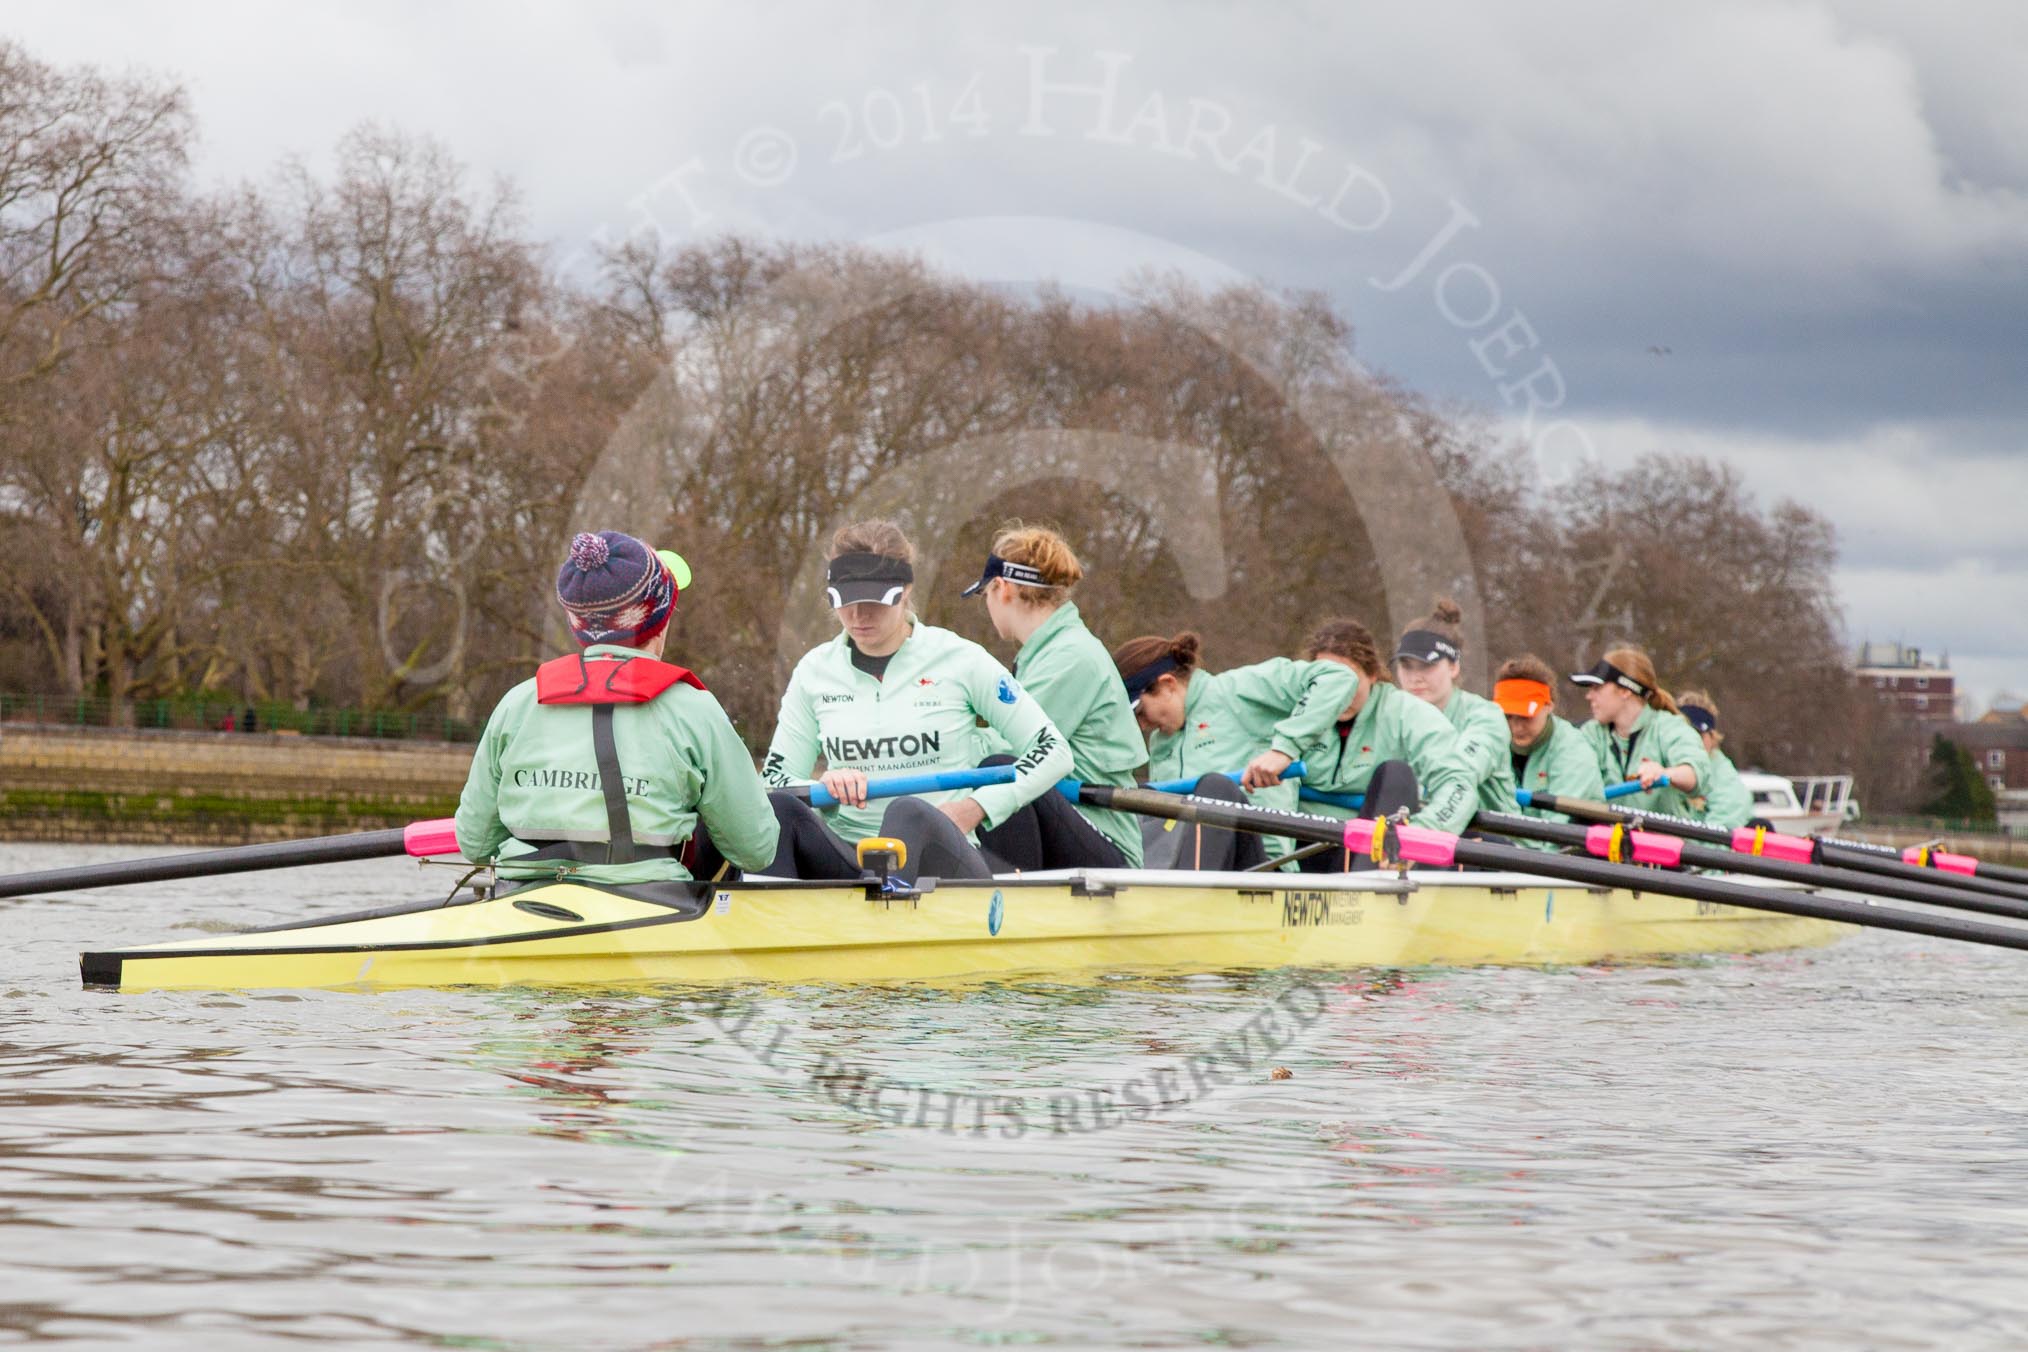 The Boat Race season 2014 - fixture CUWBC vs Thames RC.




on 02 March 2014 at 12:38, image #11